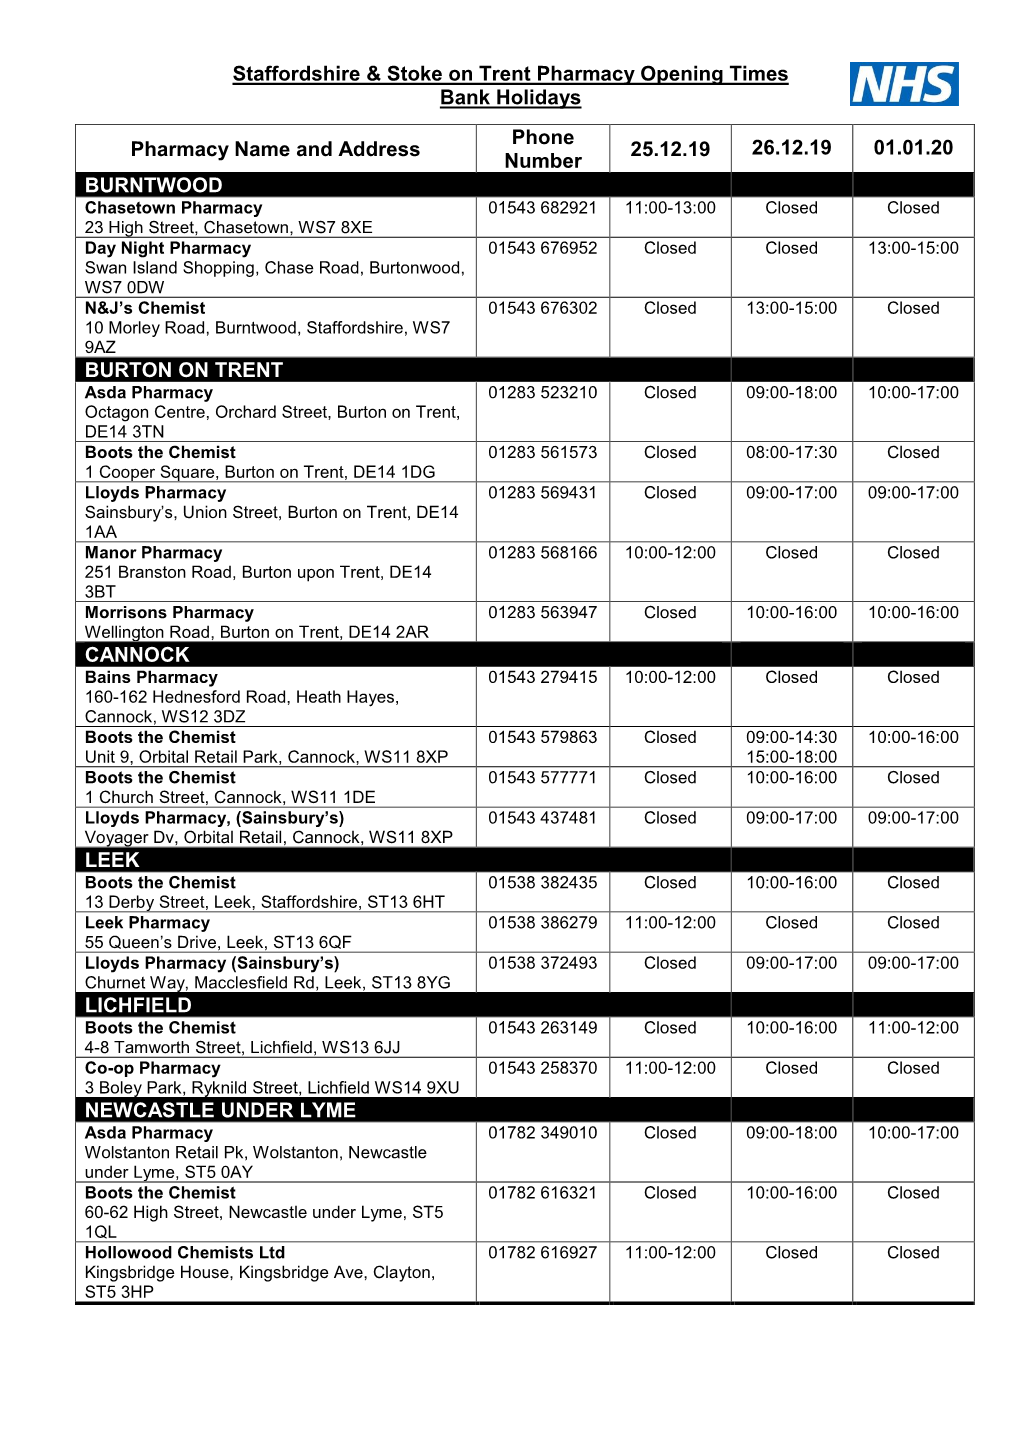 Staffordshire & Stoke on Trent Pharmacy Opening Times Bank